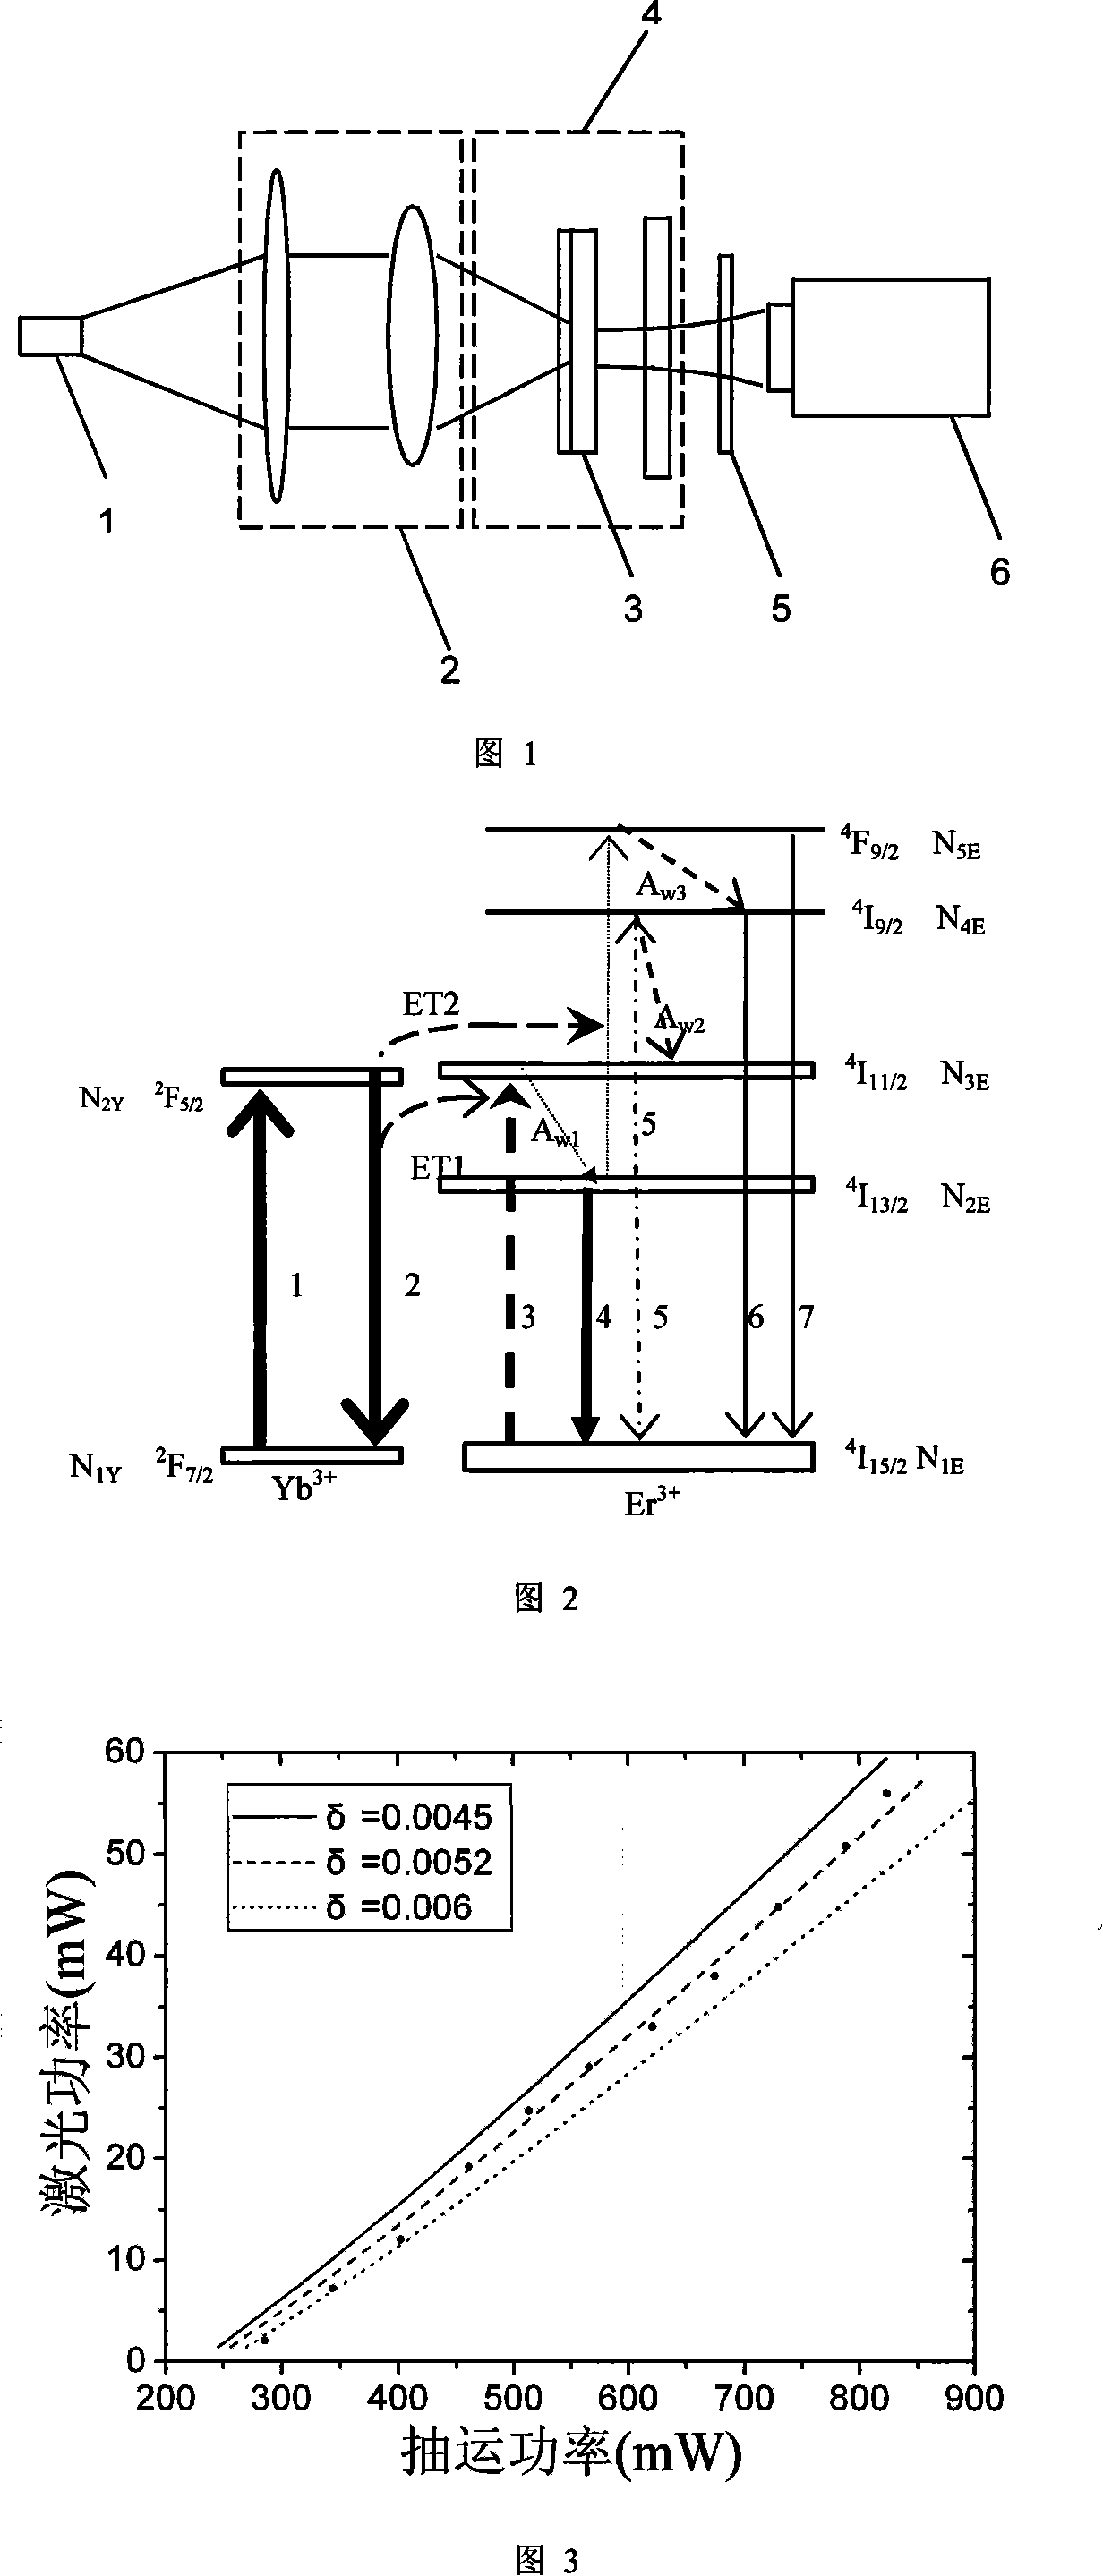 Method for measuring intra-cavity loss of LD pumping solid state laser device and equipment using the method